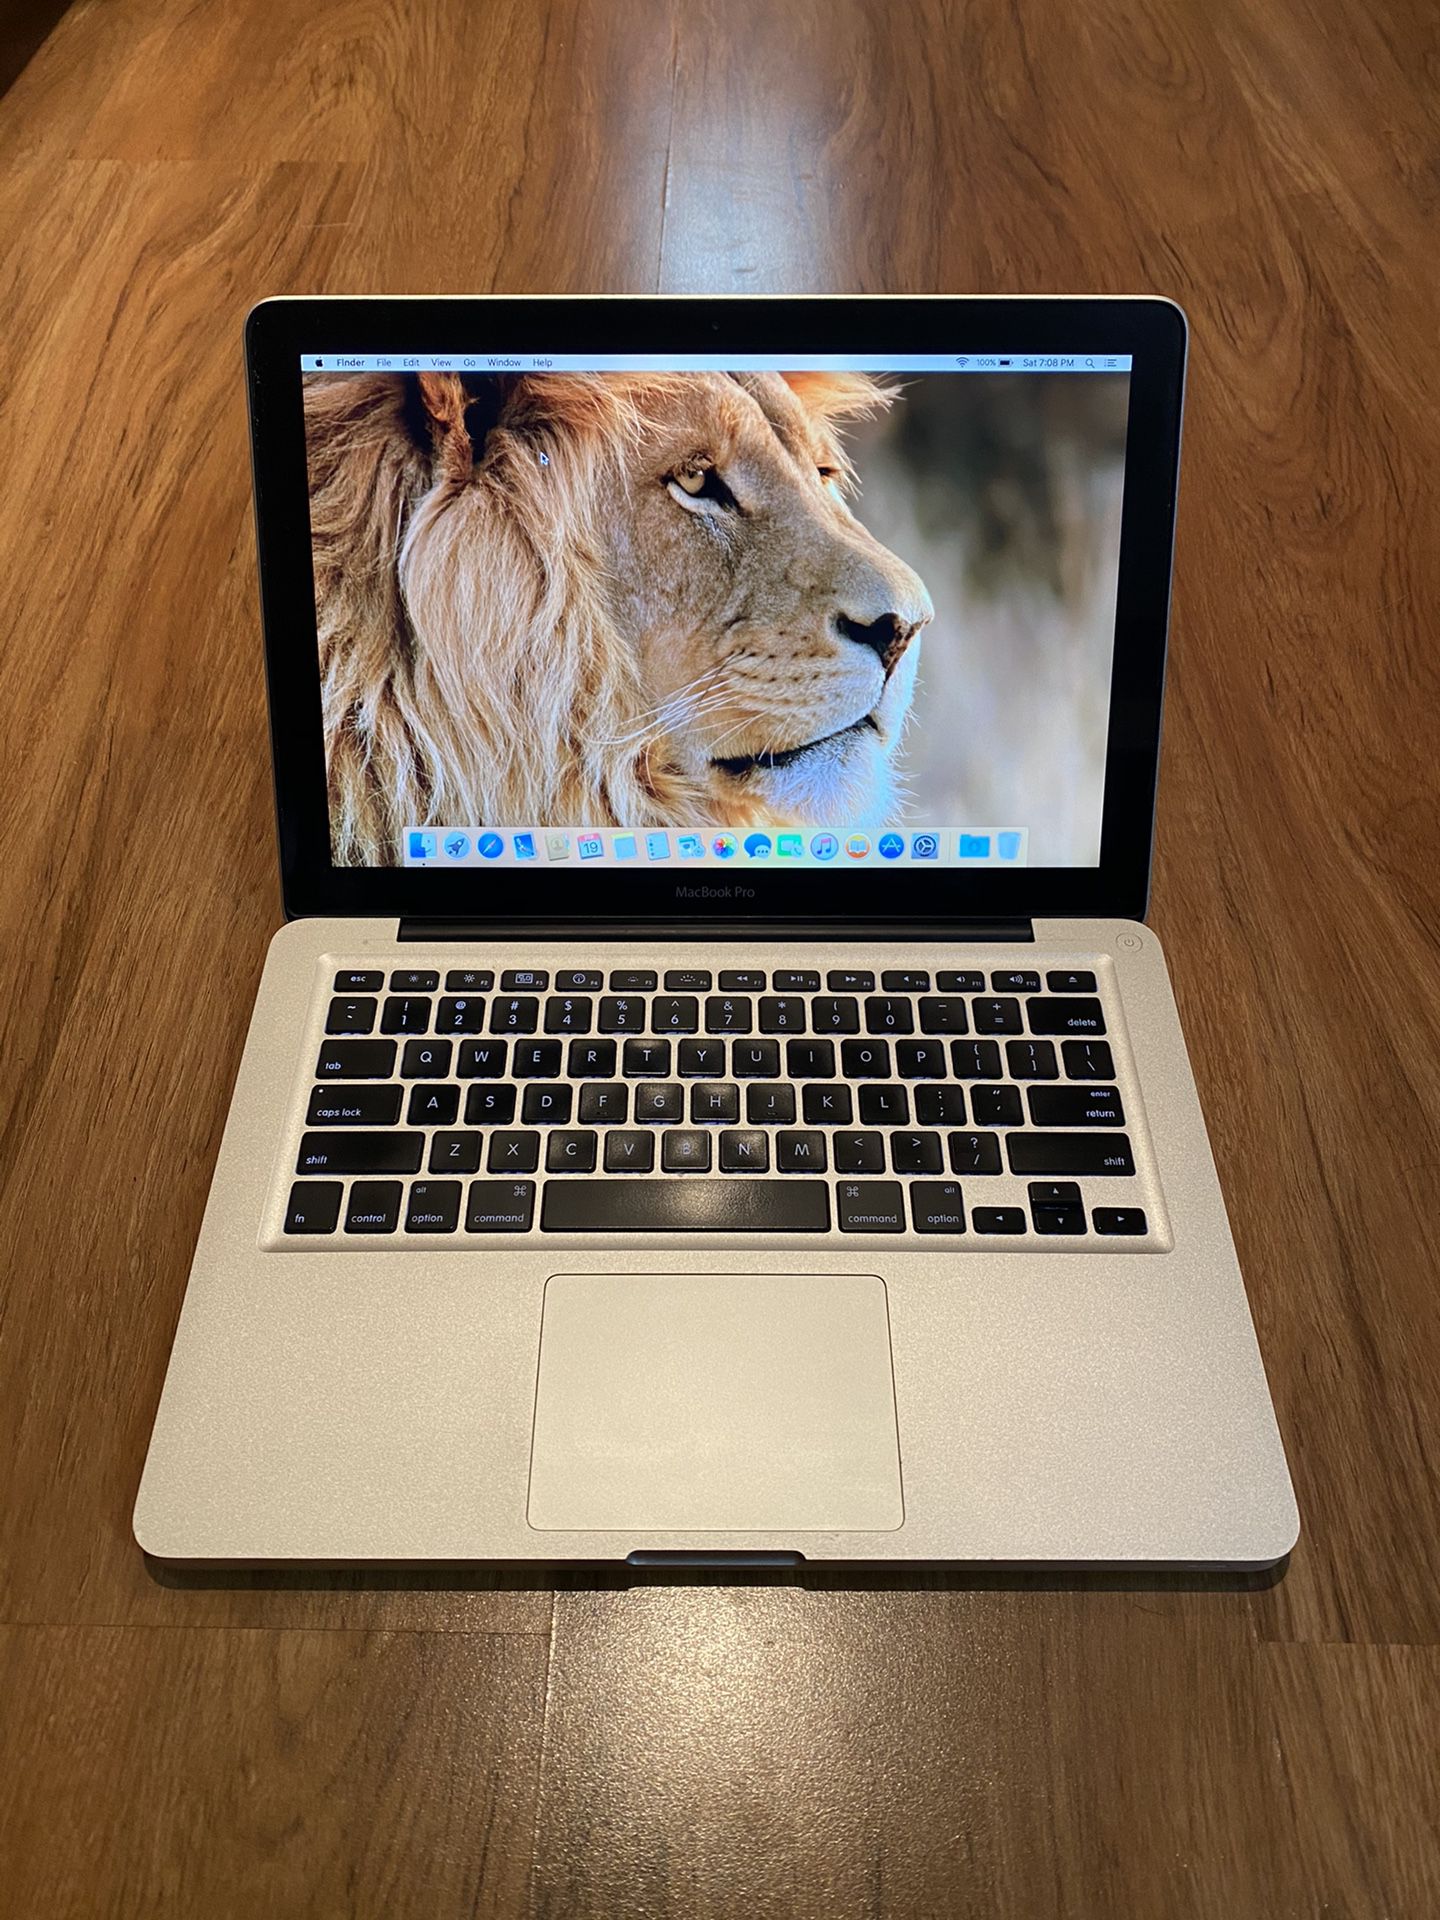 Macbook Pro OS X El Capitan 10.11.6 (13 inch-Mid 2010) 4GB Ram 250GB Hard Drive 13.3 inch HD Screen Laptop with charger in Excellent Working conditio